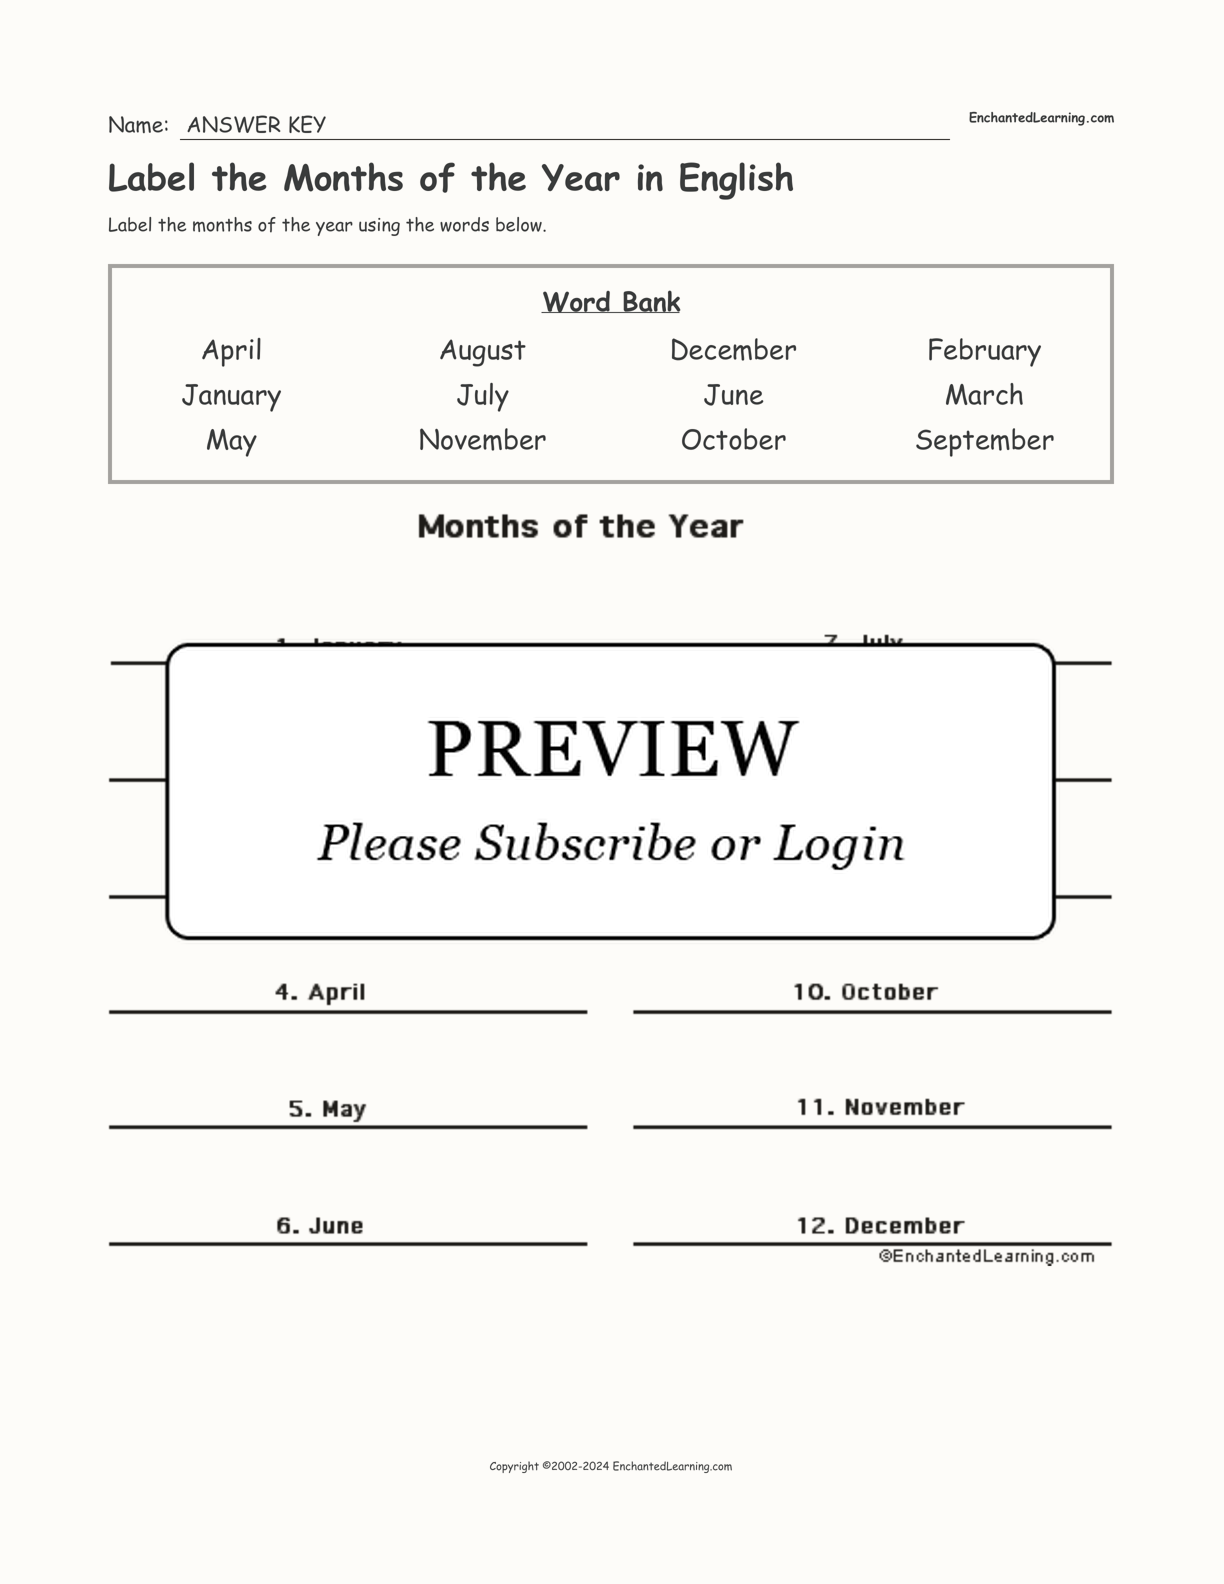 Label the Months of the Year in English interactive worksheet page 2